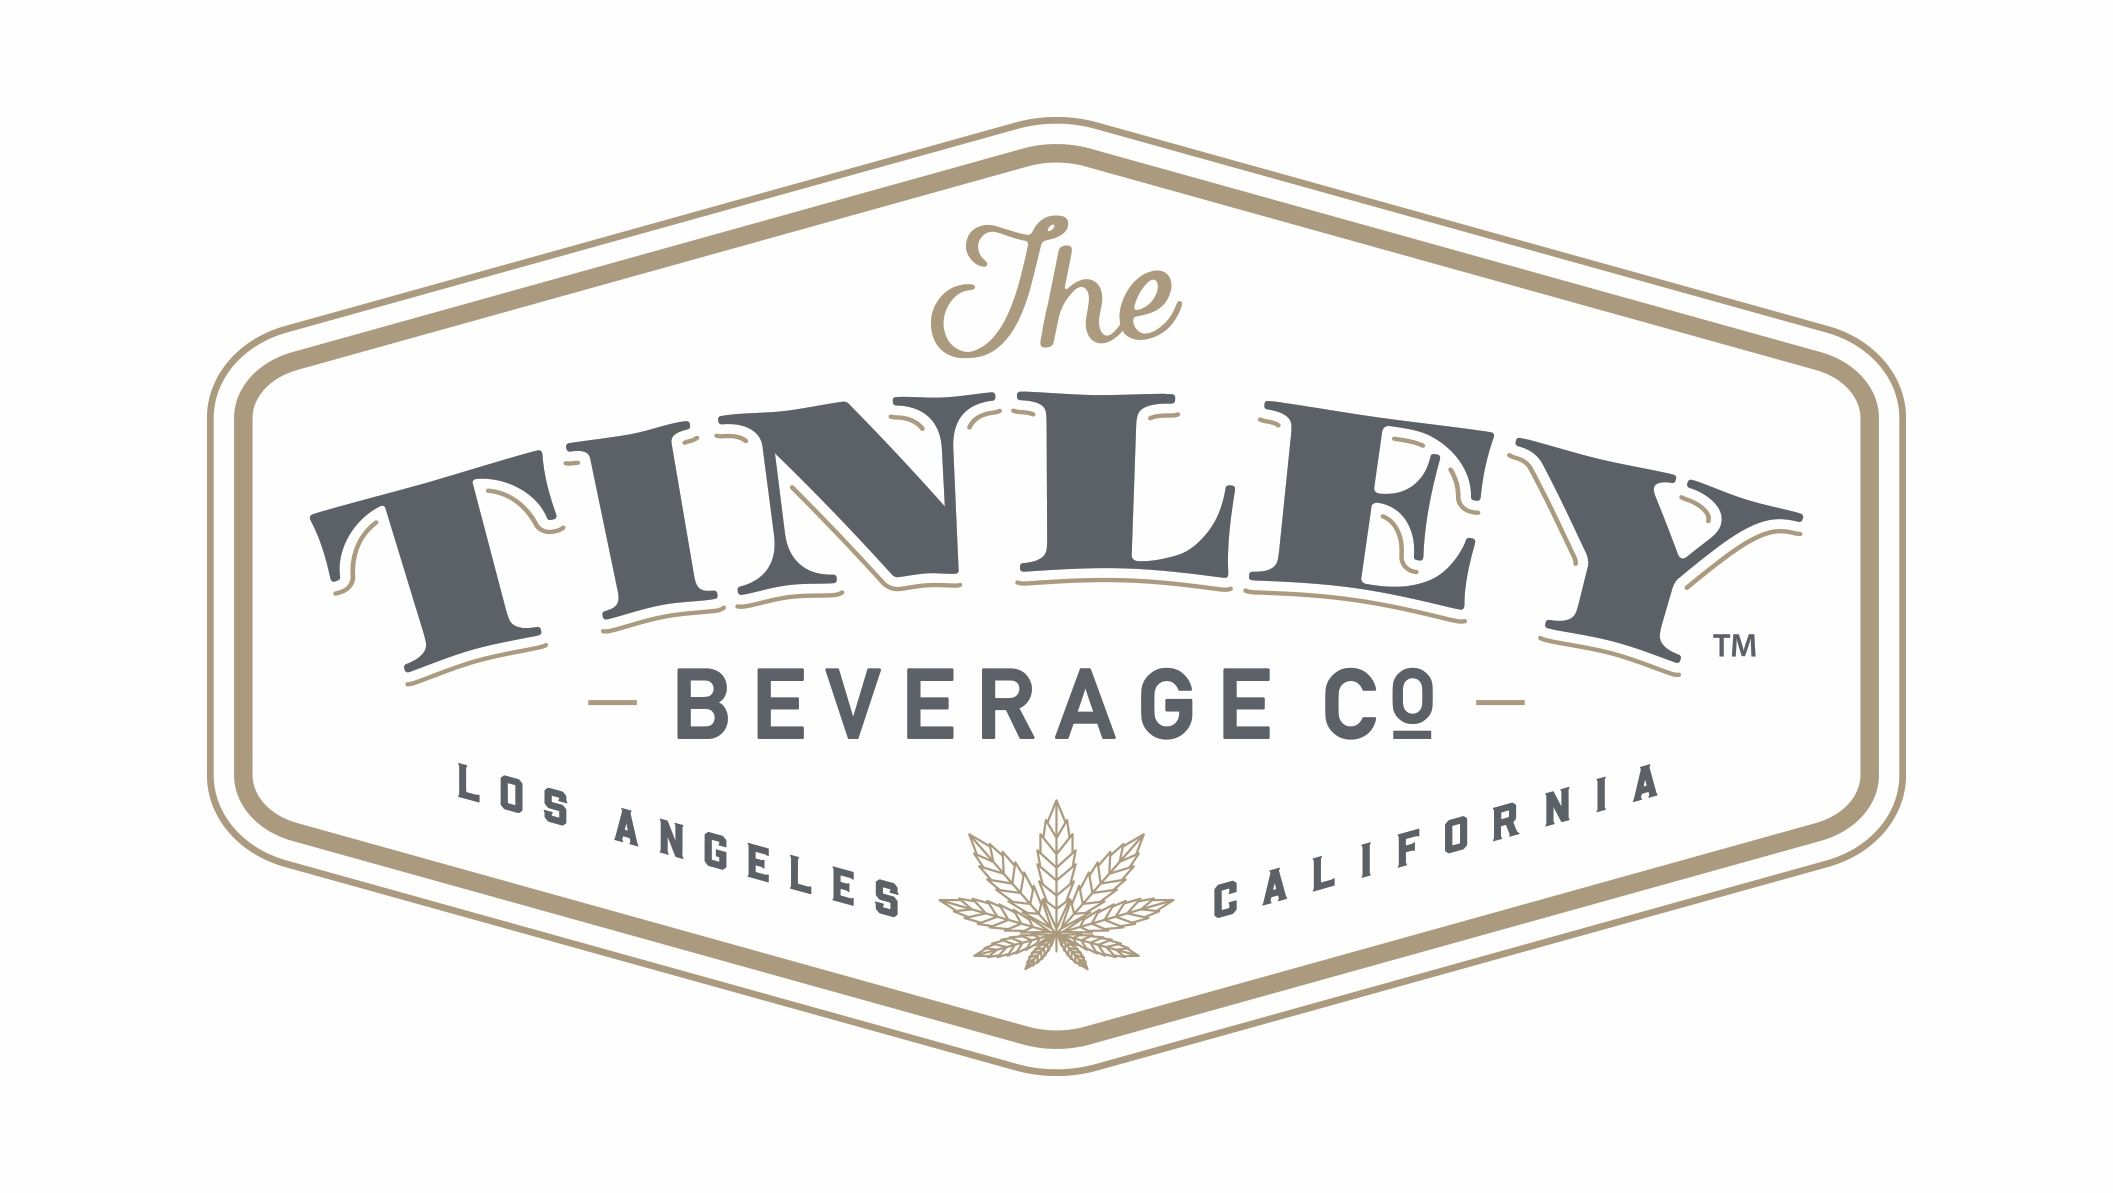 Tinley Appoints Ente